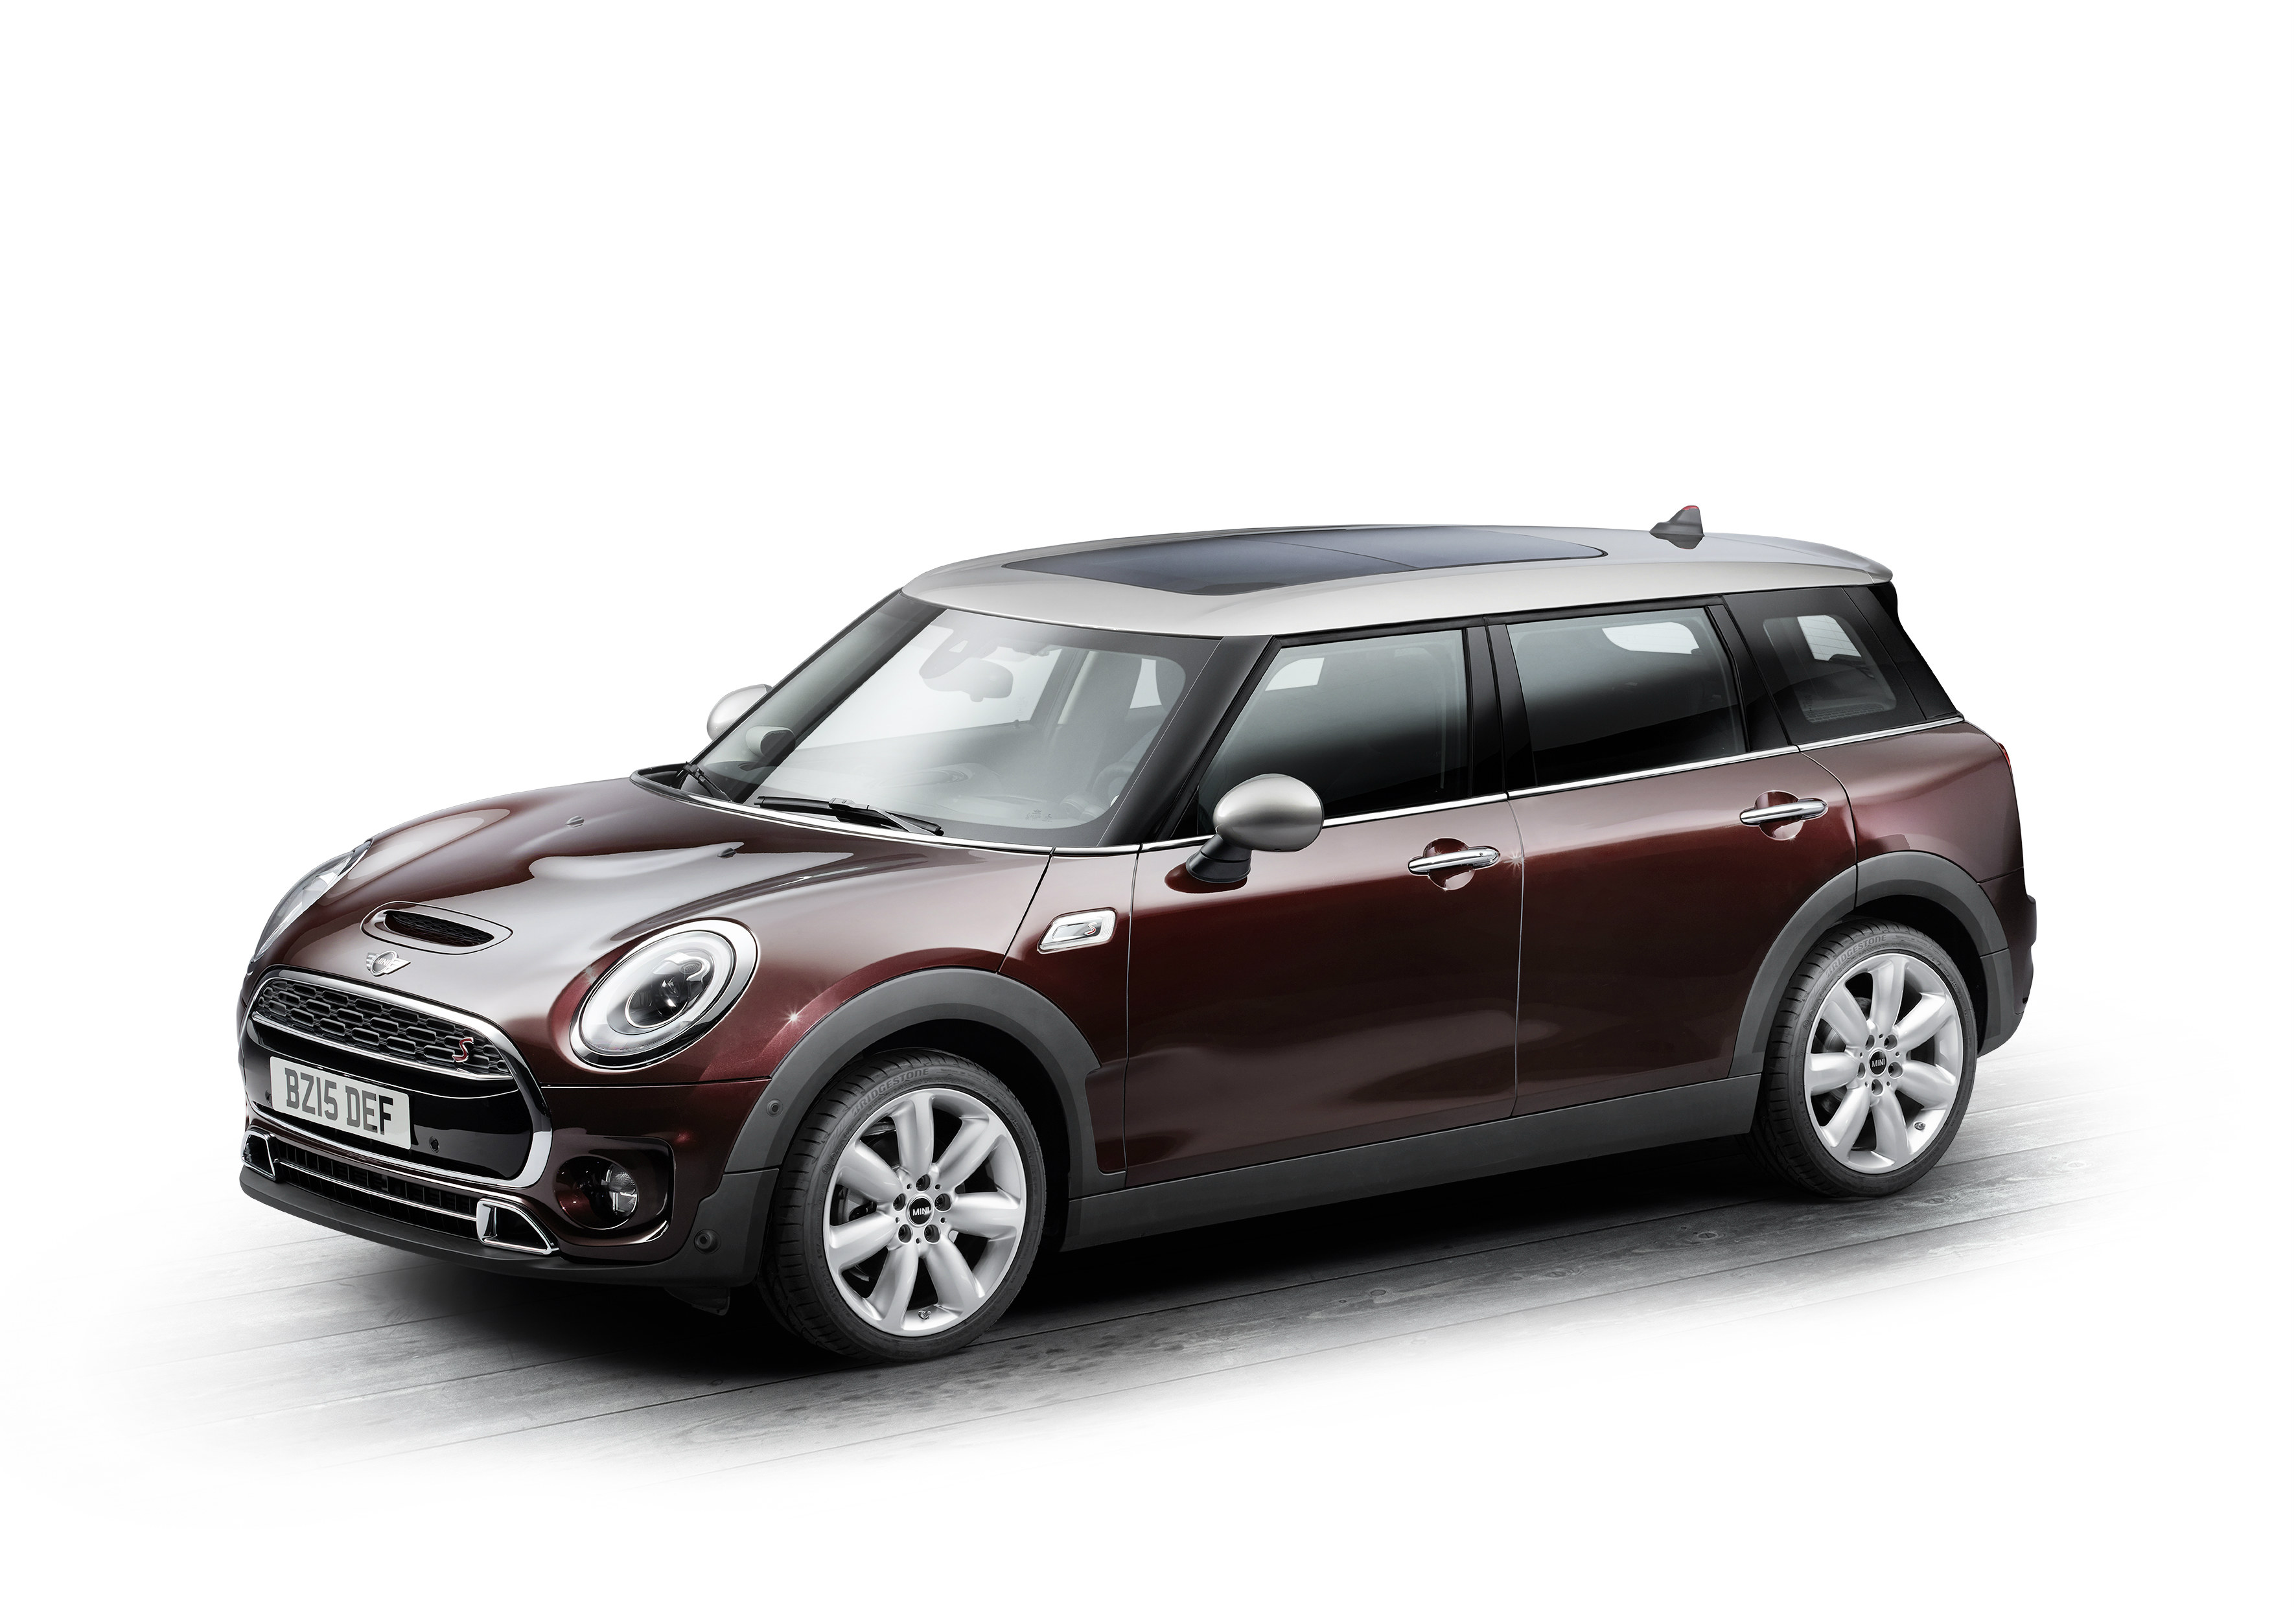 Mini Clubman 2015 goes on sale on 31 October